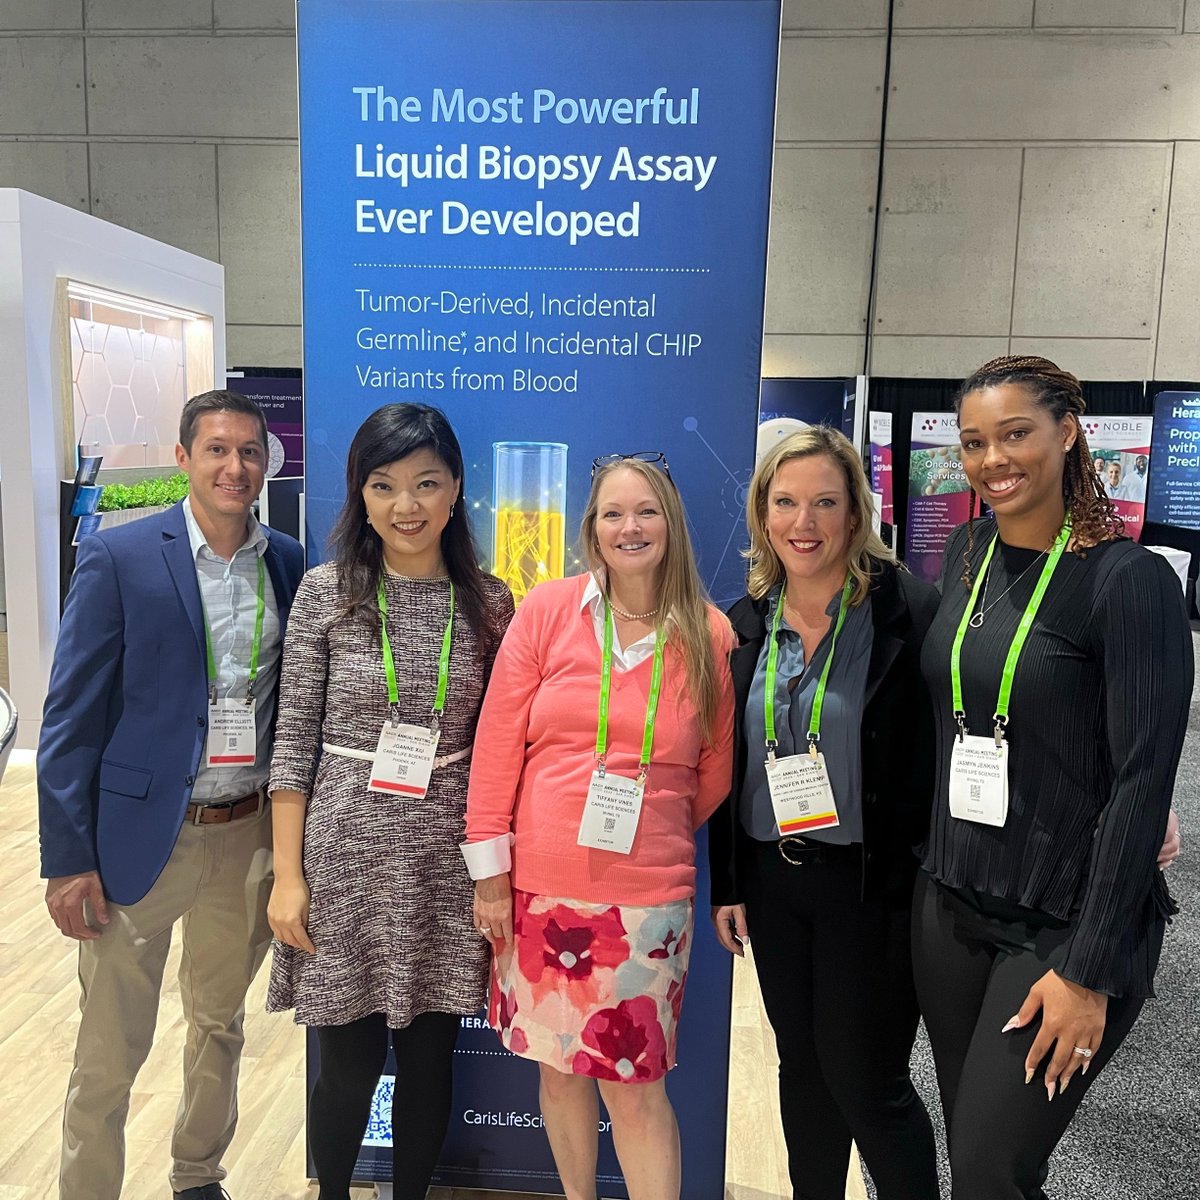 Our team is waiting to chat with you at booth 1105. Take advantage of the opportunity to network with Caris during #AACR24. carislifesciences.com